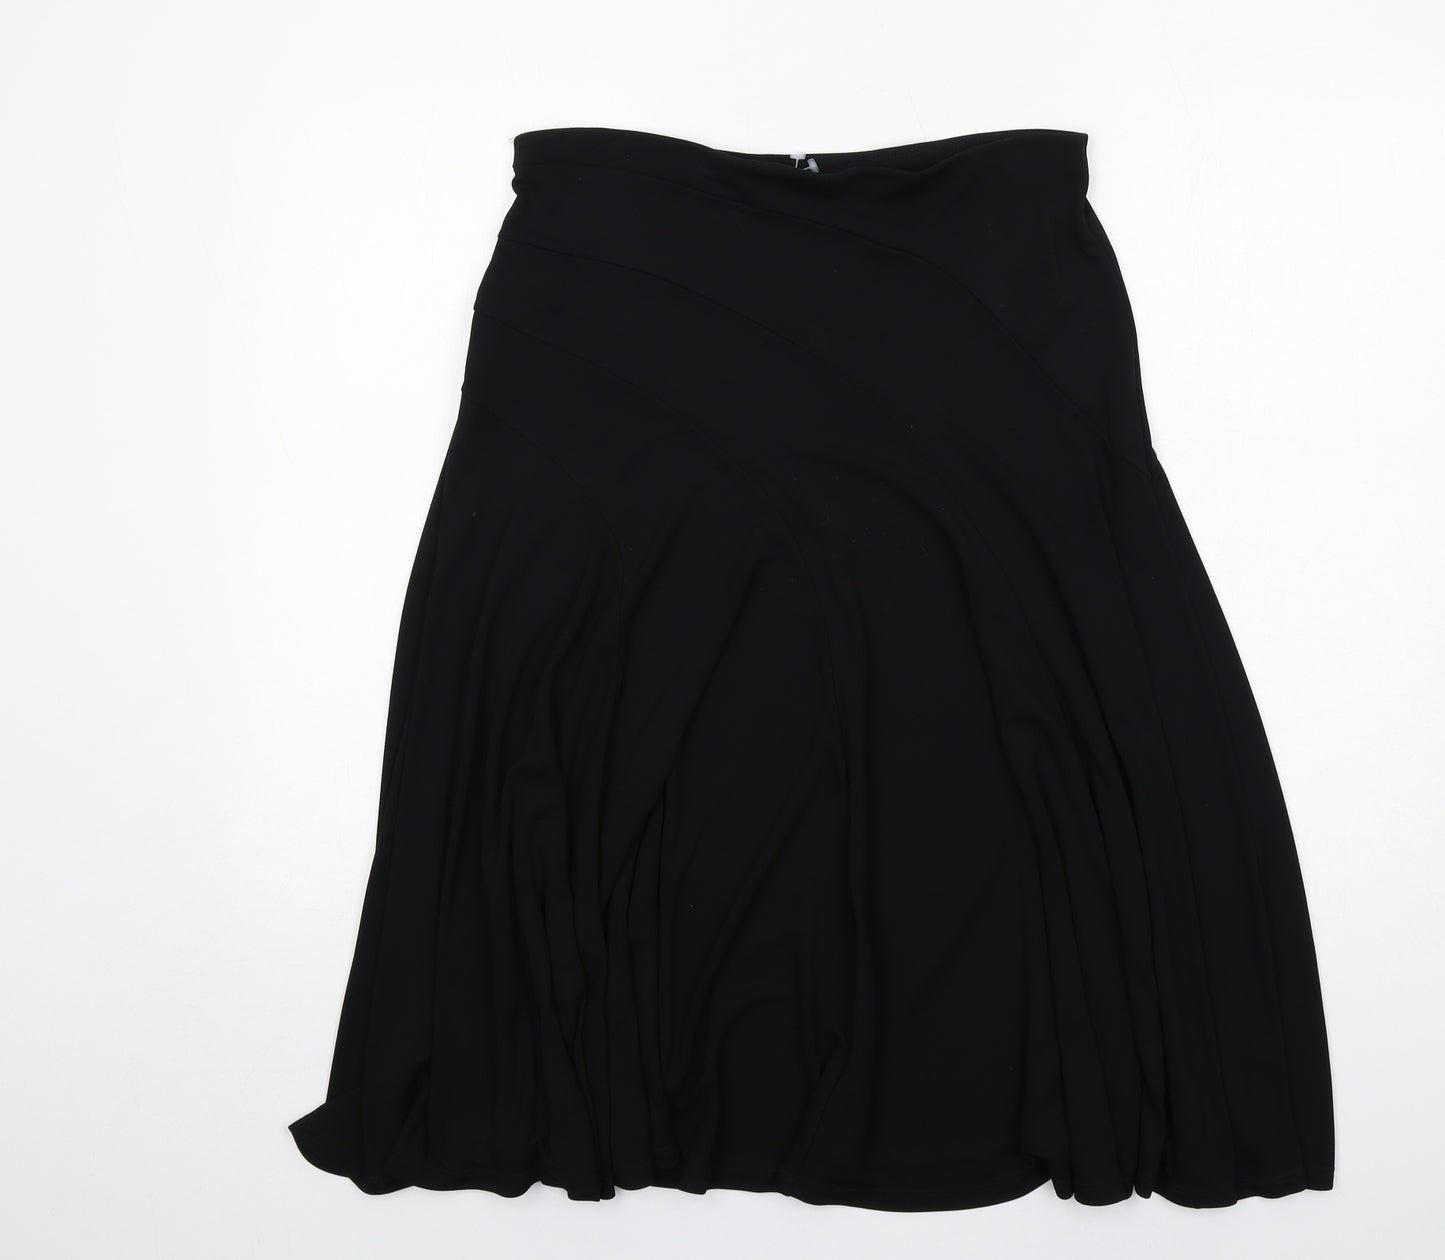 Autograph Womens Black Polyester Swing Skirt Size 12